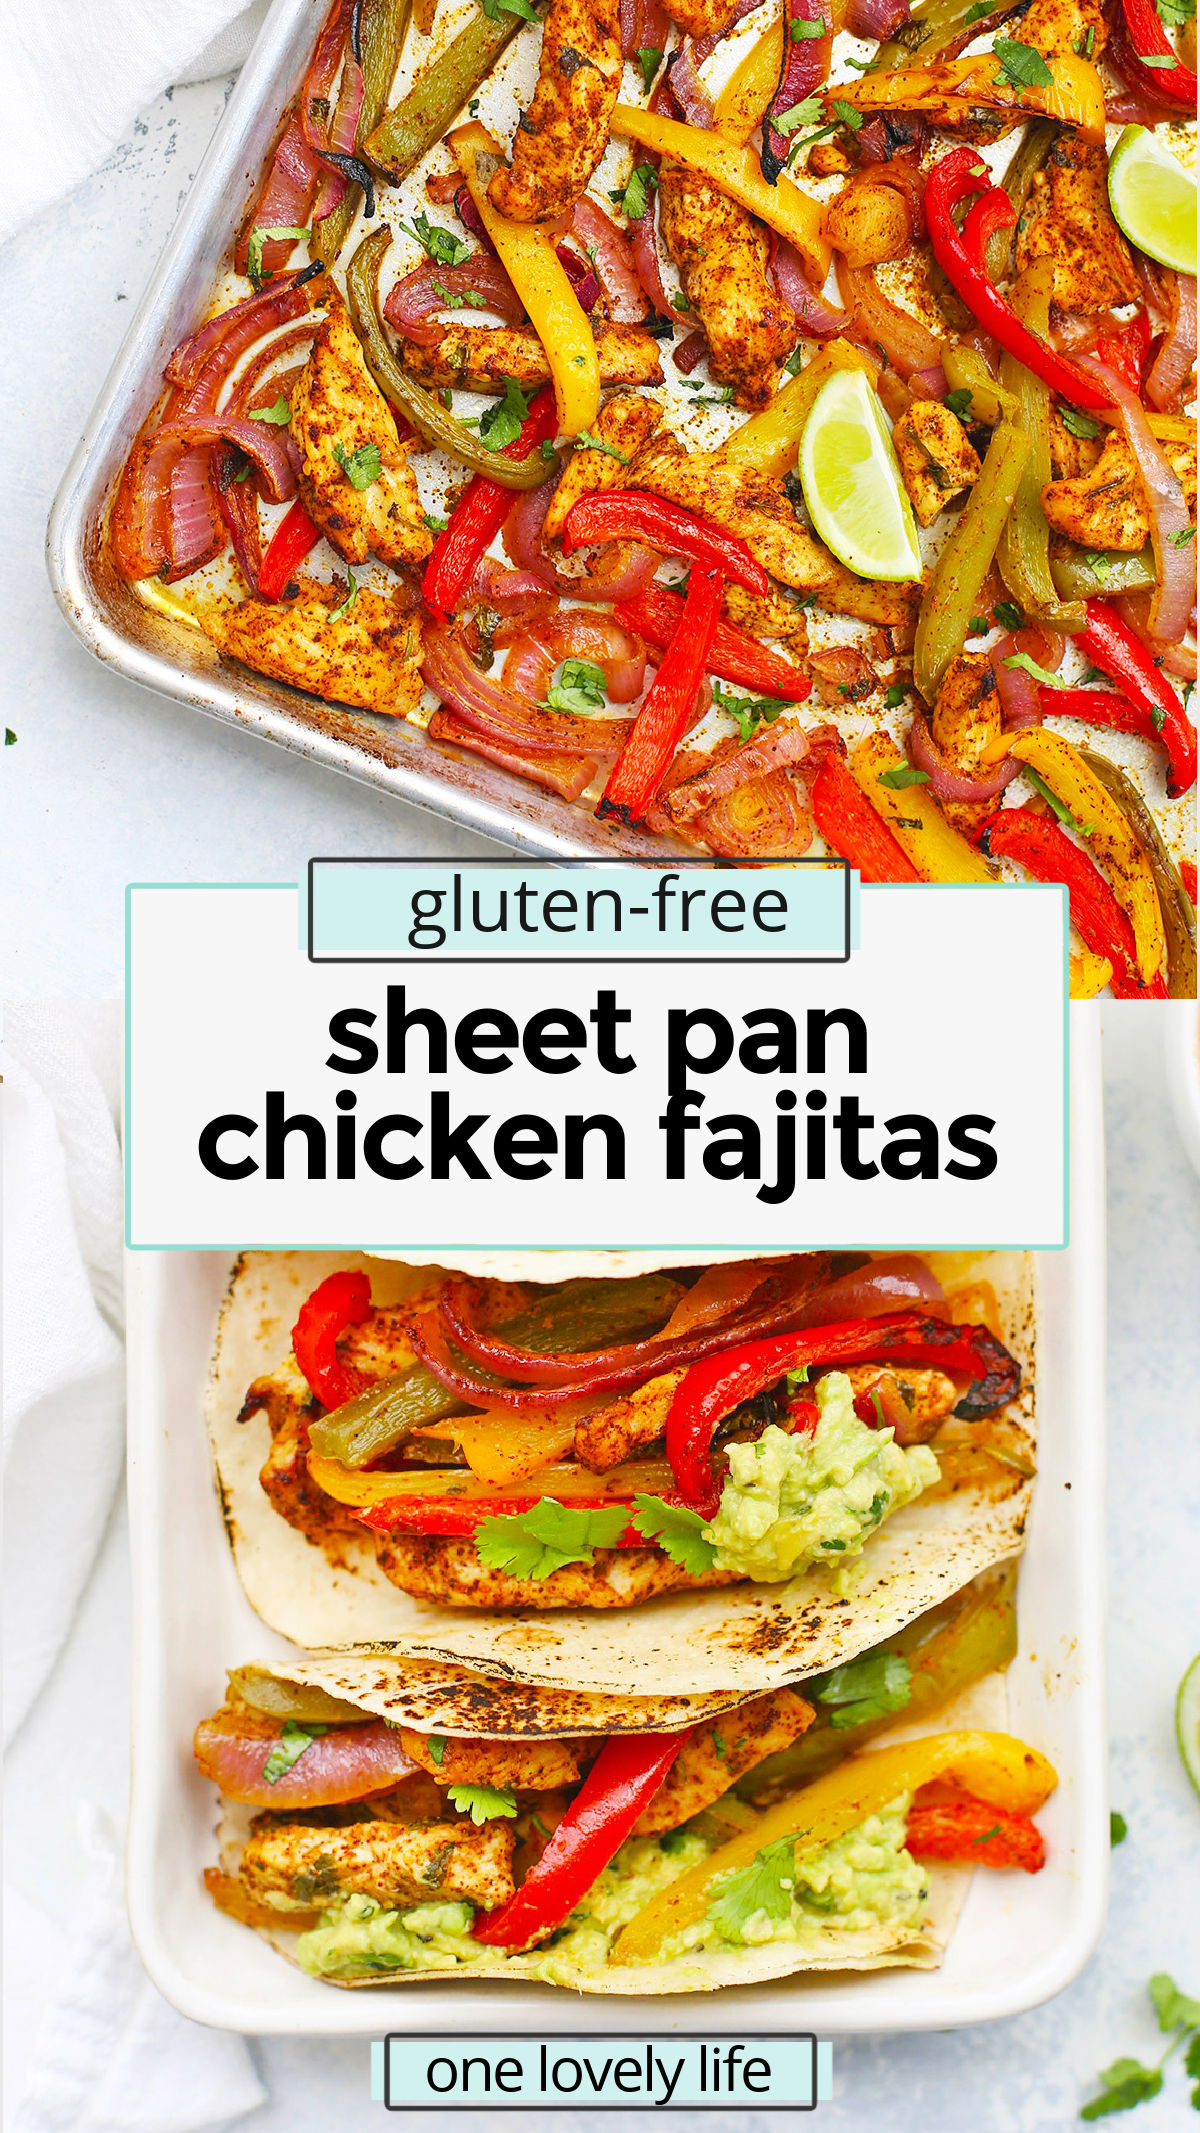 Sheet Pan Chicken Fajitas - This easy one-pan dinner is a family favorite! A flavorful seasoning mix + a rainbow of veggies make this sheet pan dinner delicious! (Gluten-Free, Dairy-Free) // Healthy One Pan Dinner // Sheet Pan Fajitas Recipe // gluten free sheet pan dinner // gluten free chicken fajitas // gluten free sheet pan fajita recipe // easy gluten free dinner // easy dinners //